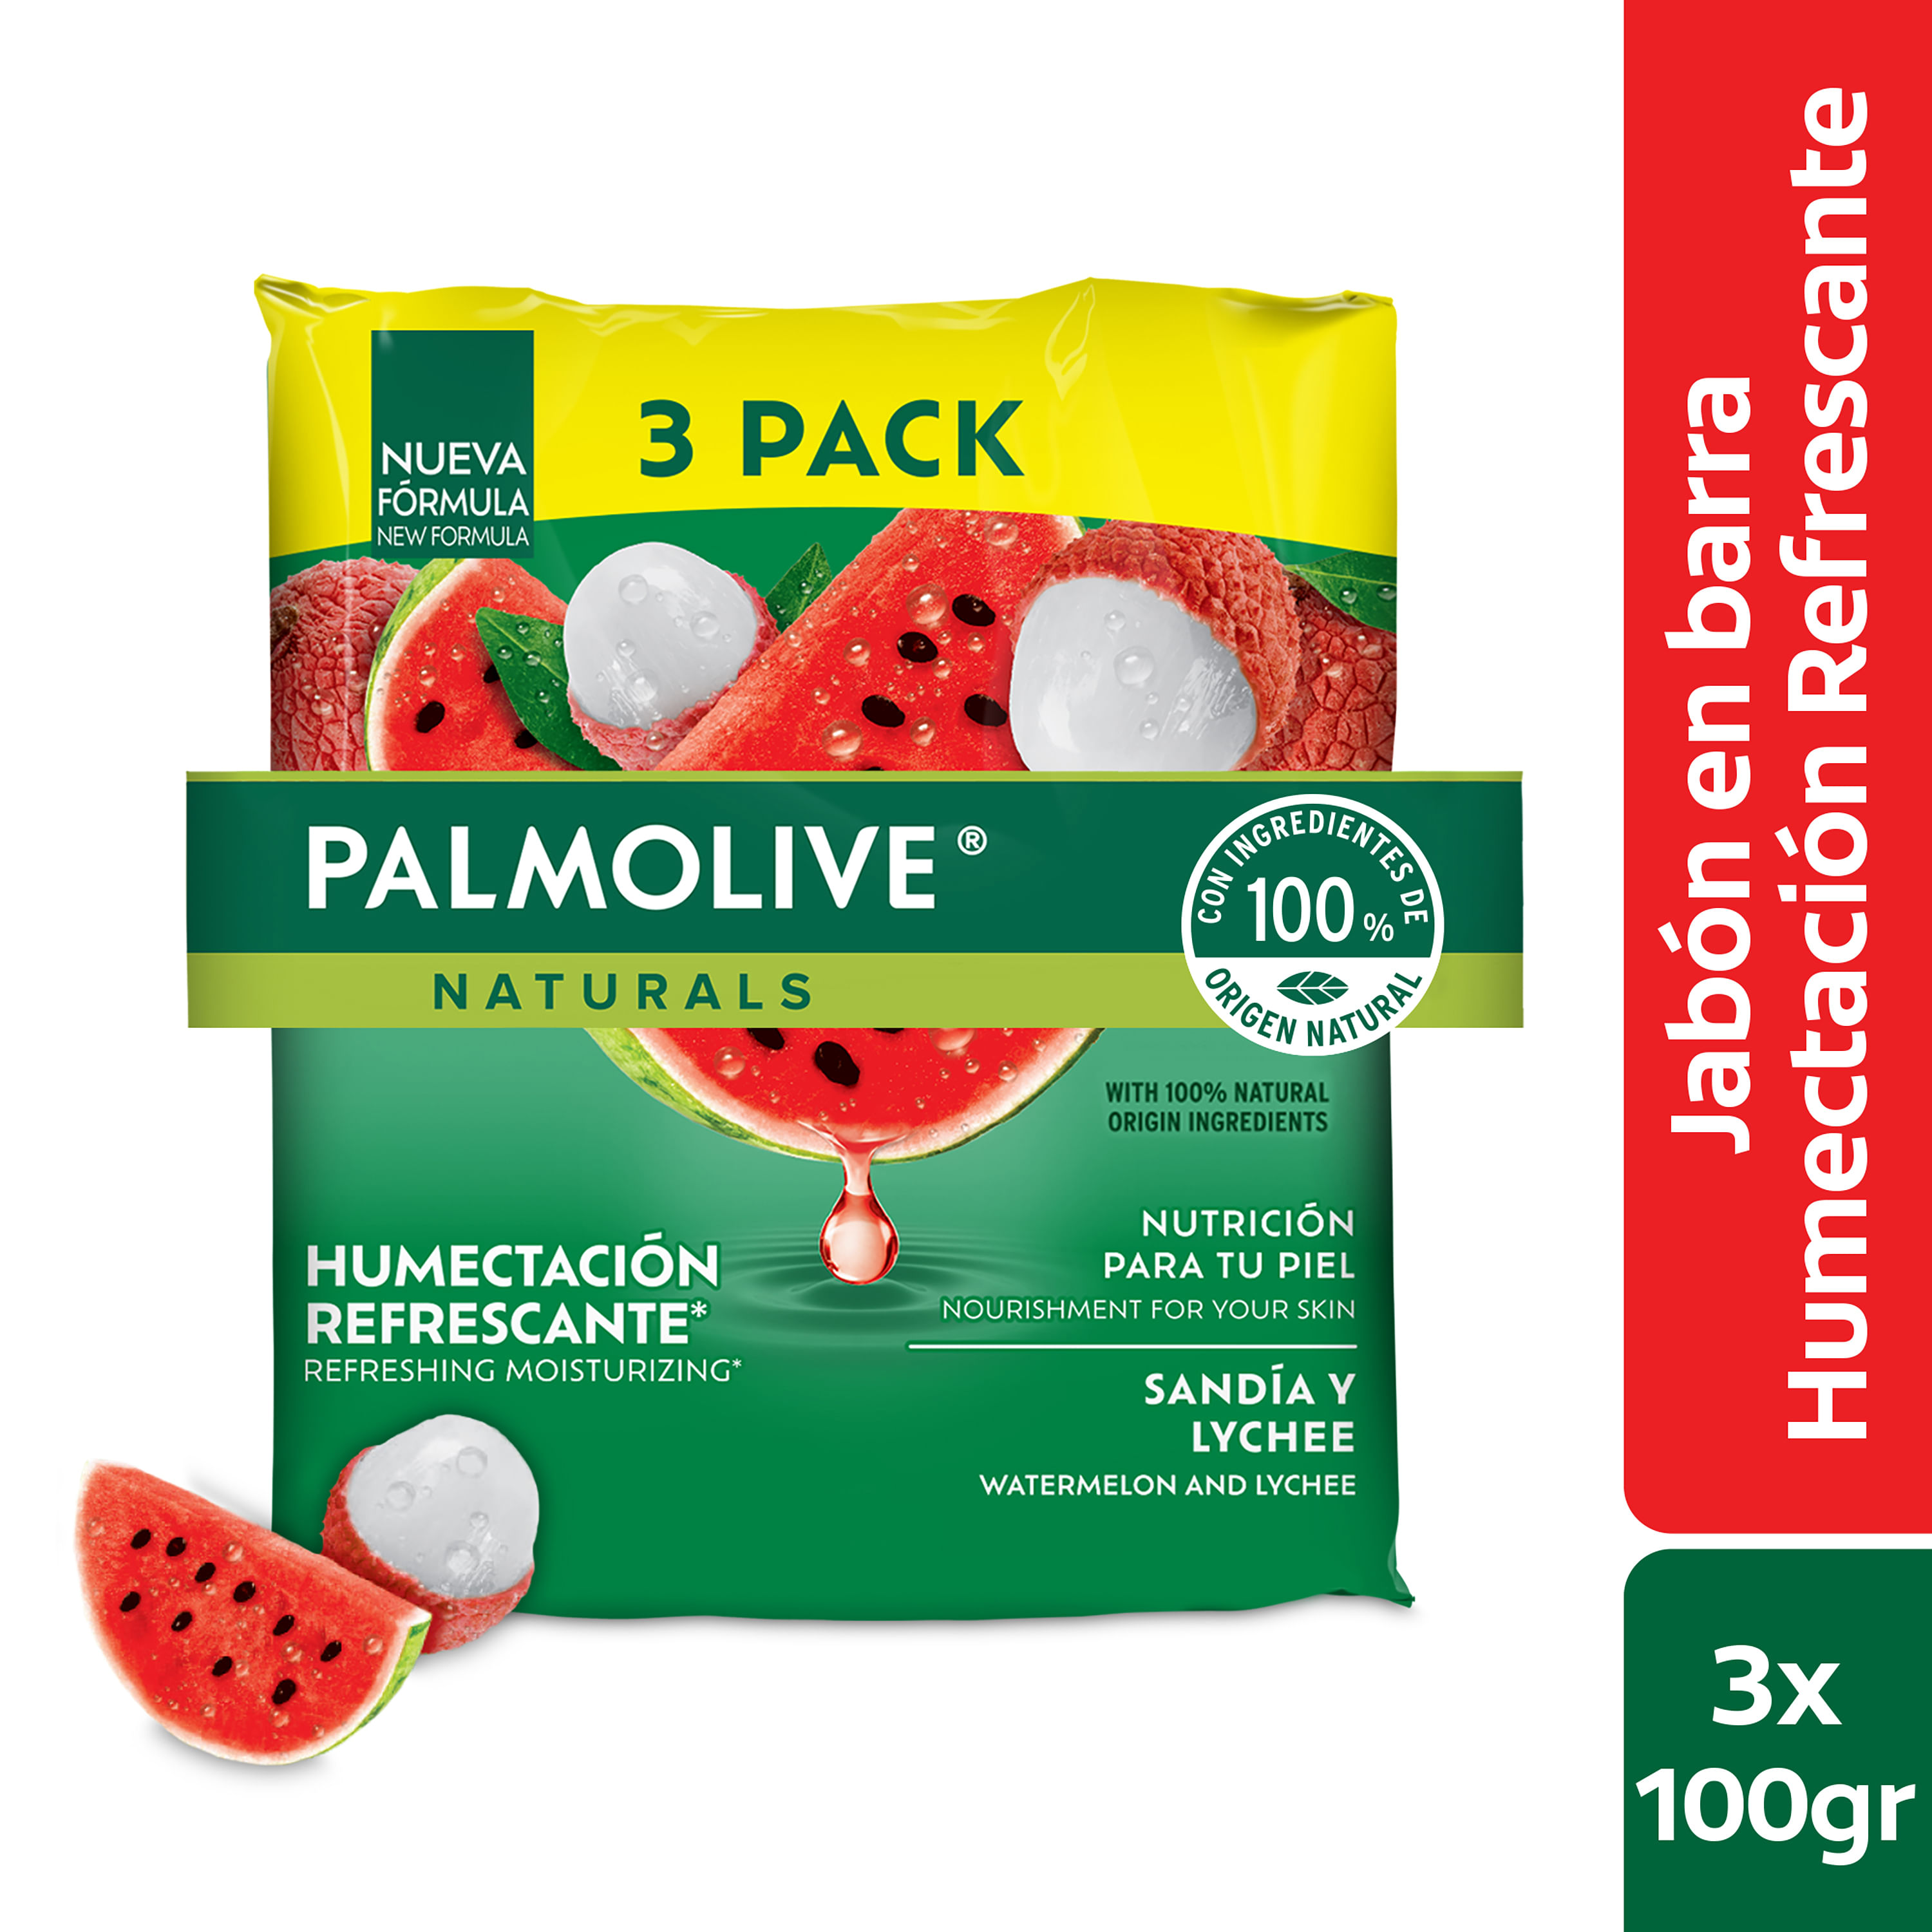 Jabon-Corporal-Palmolive-Naturals-Humectaci-n-Refrescante-Sand-a-y-Lychee-100-g-3-Pack-1-12985